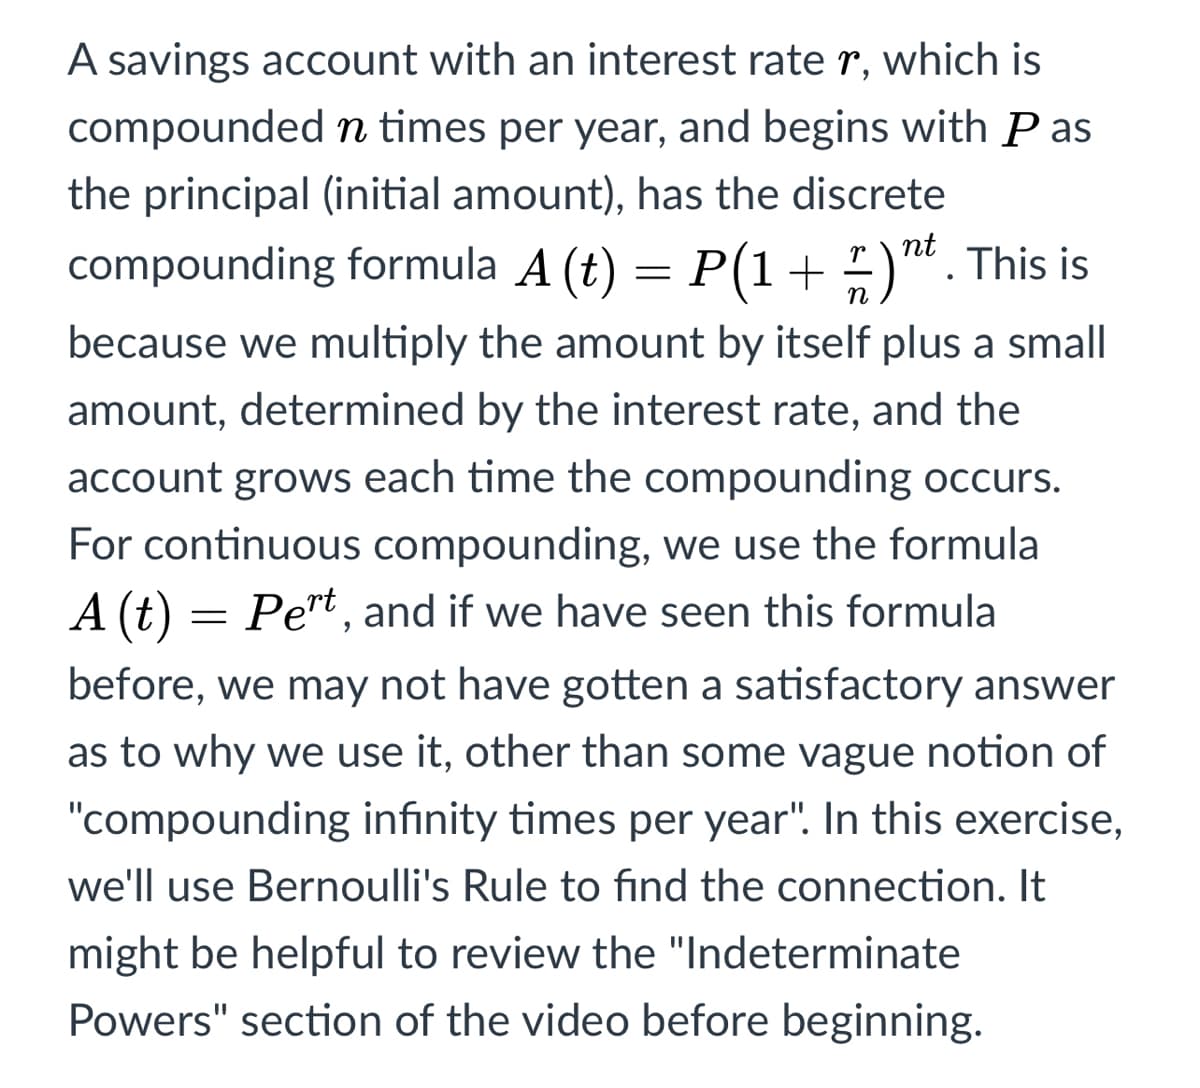 A savings account with an interest rate r, which is
compounded n times per year, and begins with P as
the principal (initial amount), has the discrete
nt
compounding formula A (t) = P(1+ )". This is
because we multiply the amount by itself plus a small
amount, determined by the interest rate, and the
account grows each time the compounding occurs.
For continuous compounding, we use the formula
A (t)
Pert, and if we have seen this formula
before, we may not have gotten a satisfactory answer
as to why we use it, other than some vague notion of
"compounding infinity times per year". In this exercise,
we'll use Bernoulli's Rule to find the connection. It
might be helpful to review the "Indeterminate
Powers" section of the video before beginning.
